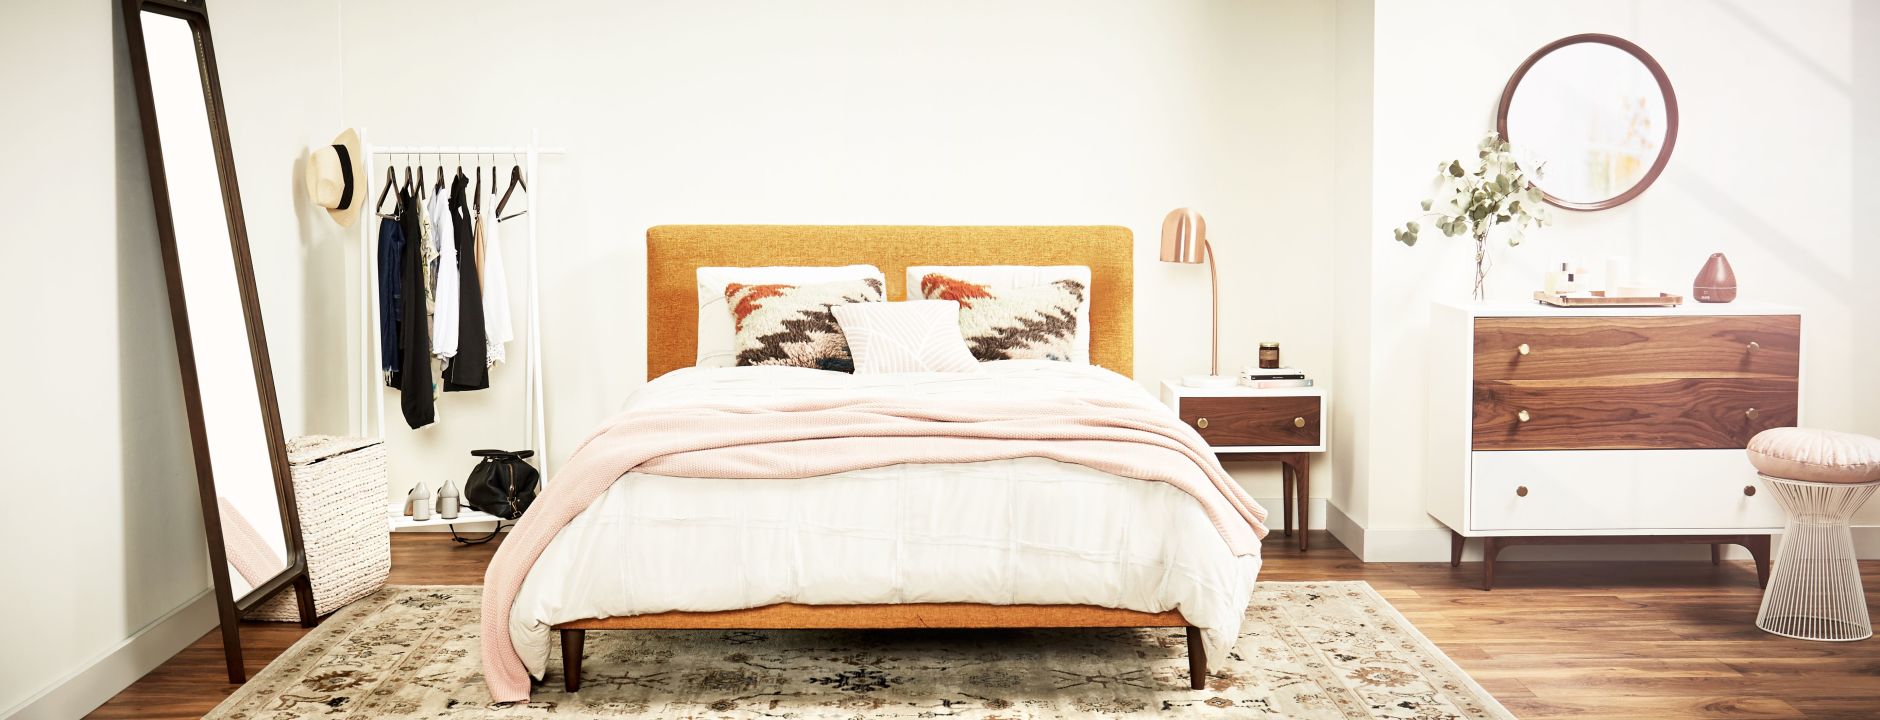 3 Tips For Designing The Perfect Guest Room Joybird